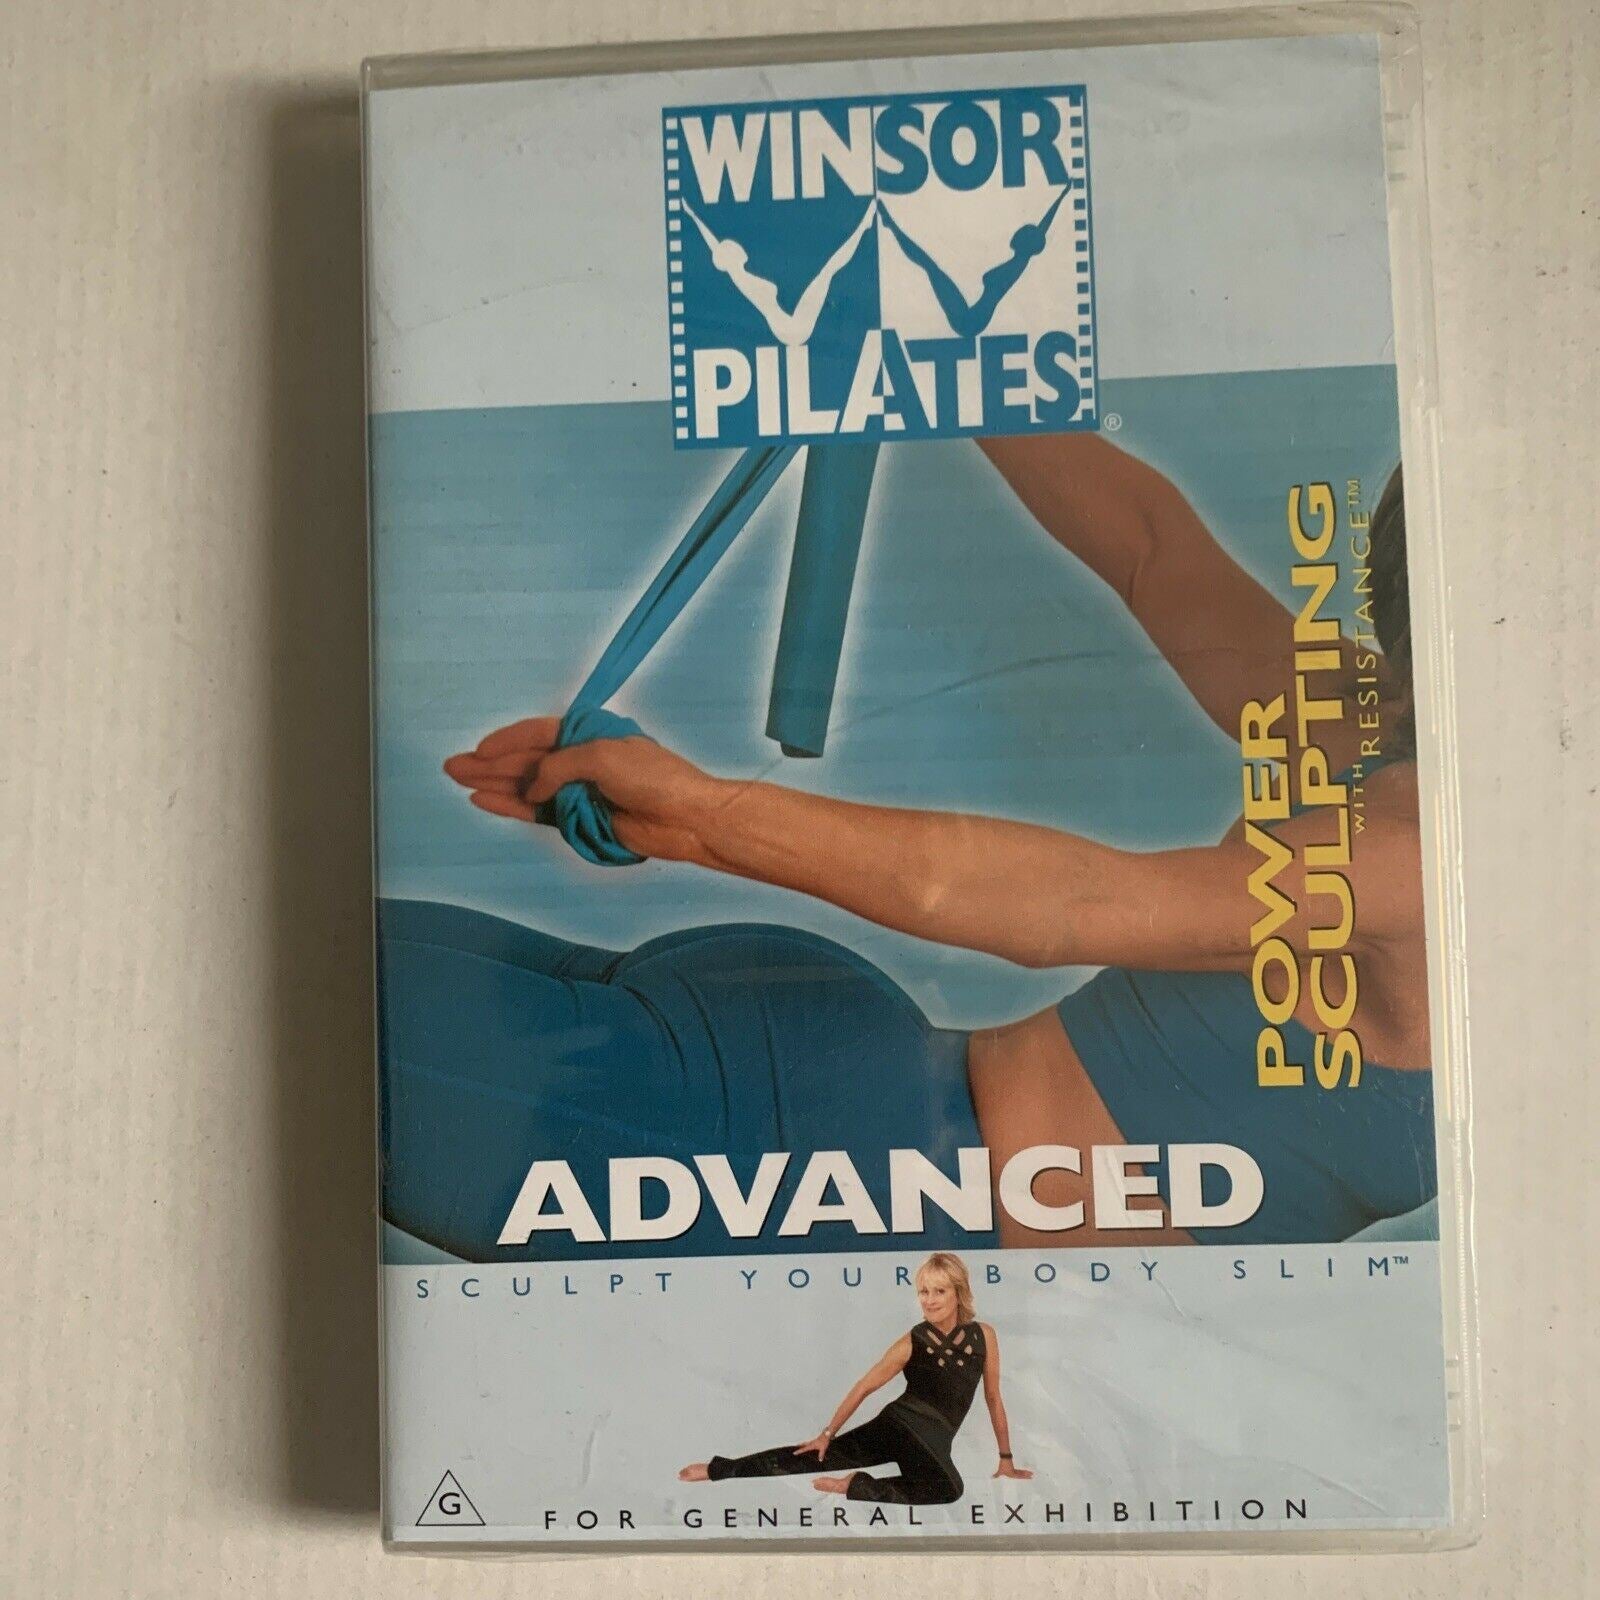 New Sealed* Winsor Pilates: Sculpt Your Body - Advanced (DVD, 2003